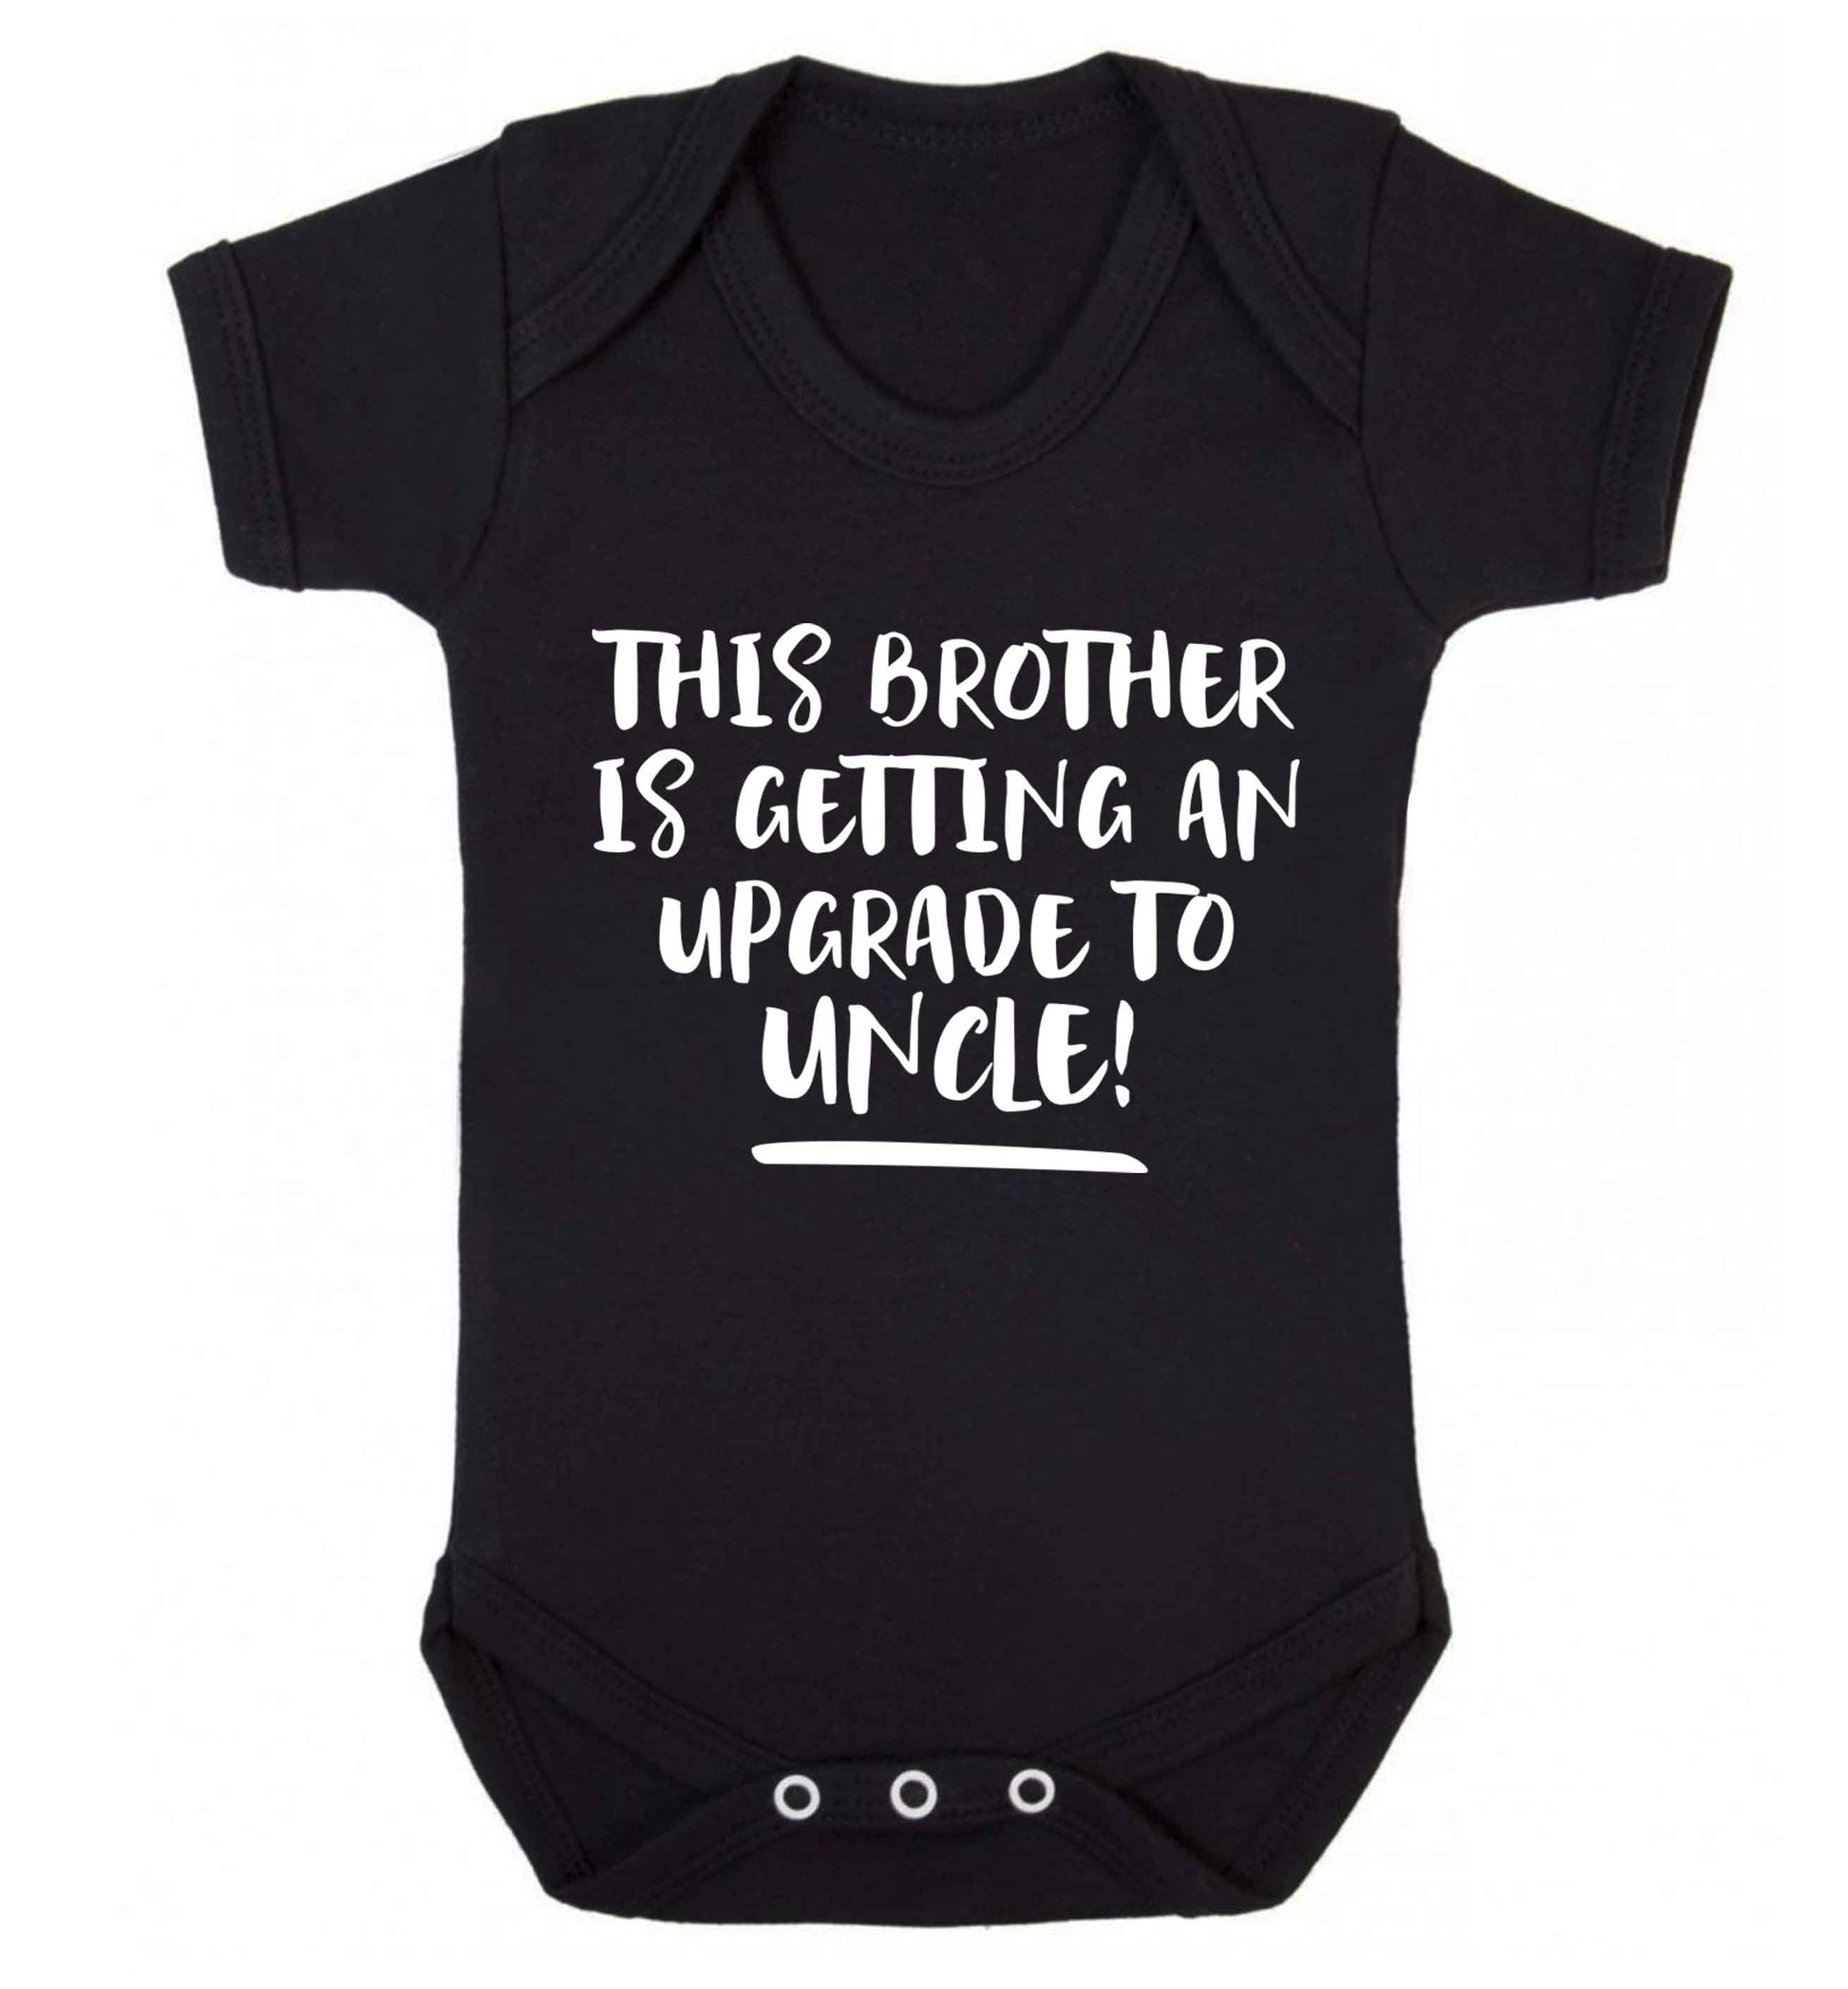 This brother is getting an upgrade to uncle! Baby Vest black 18-24 months